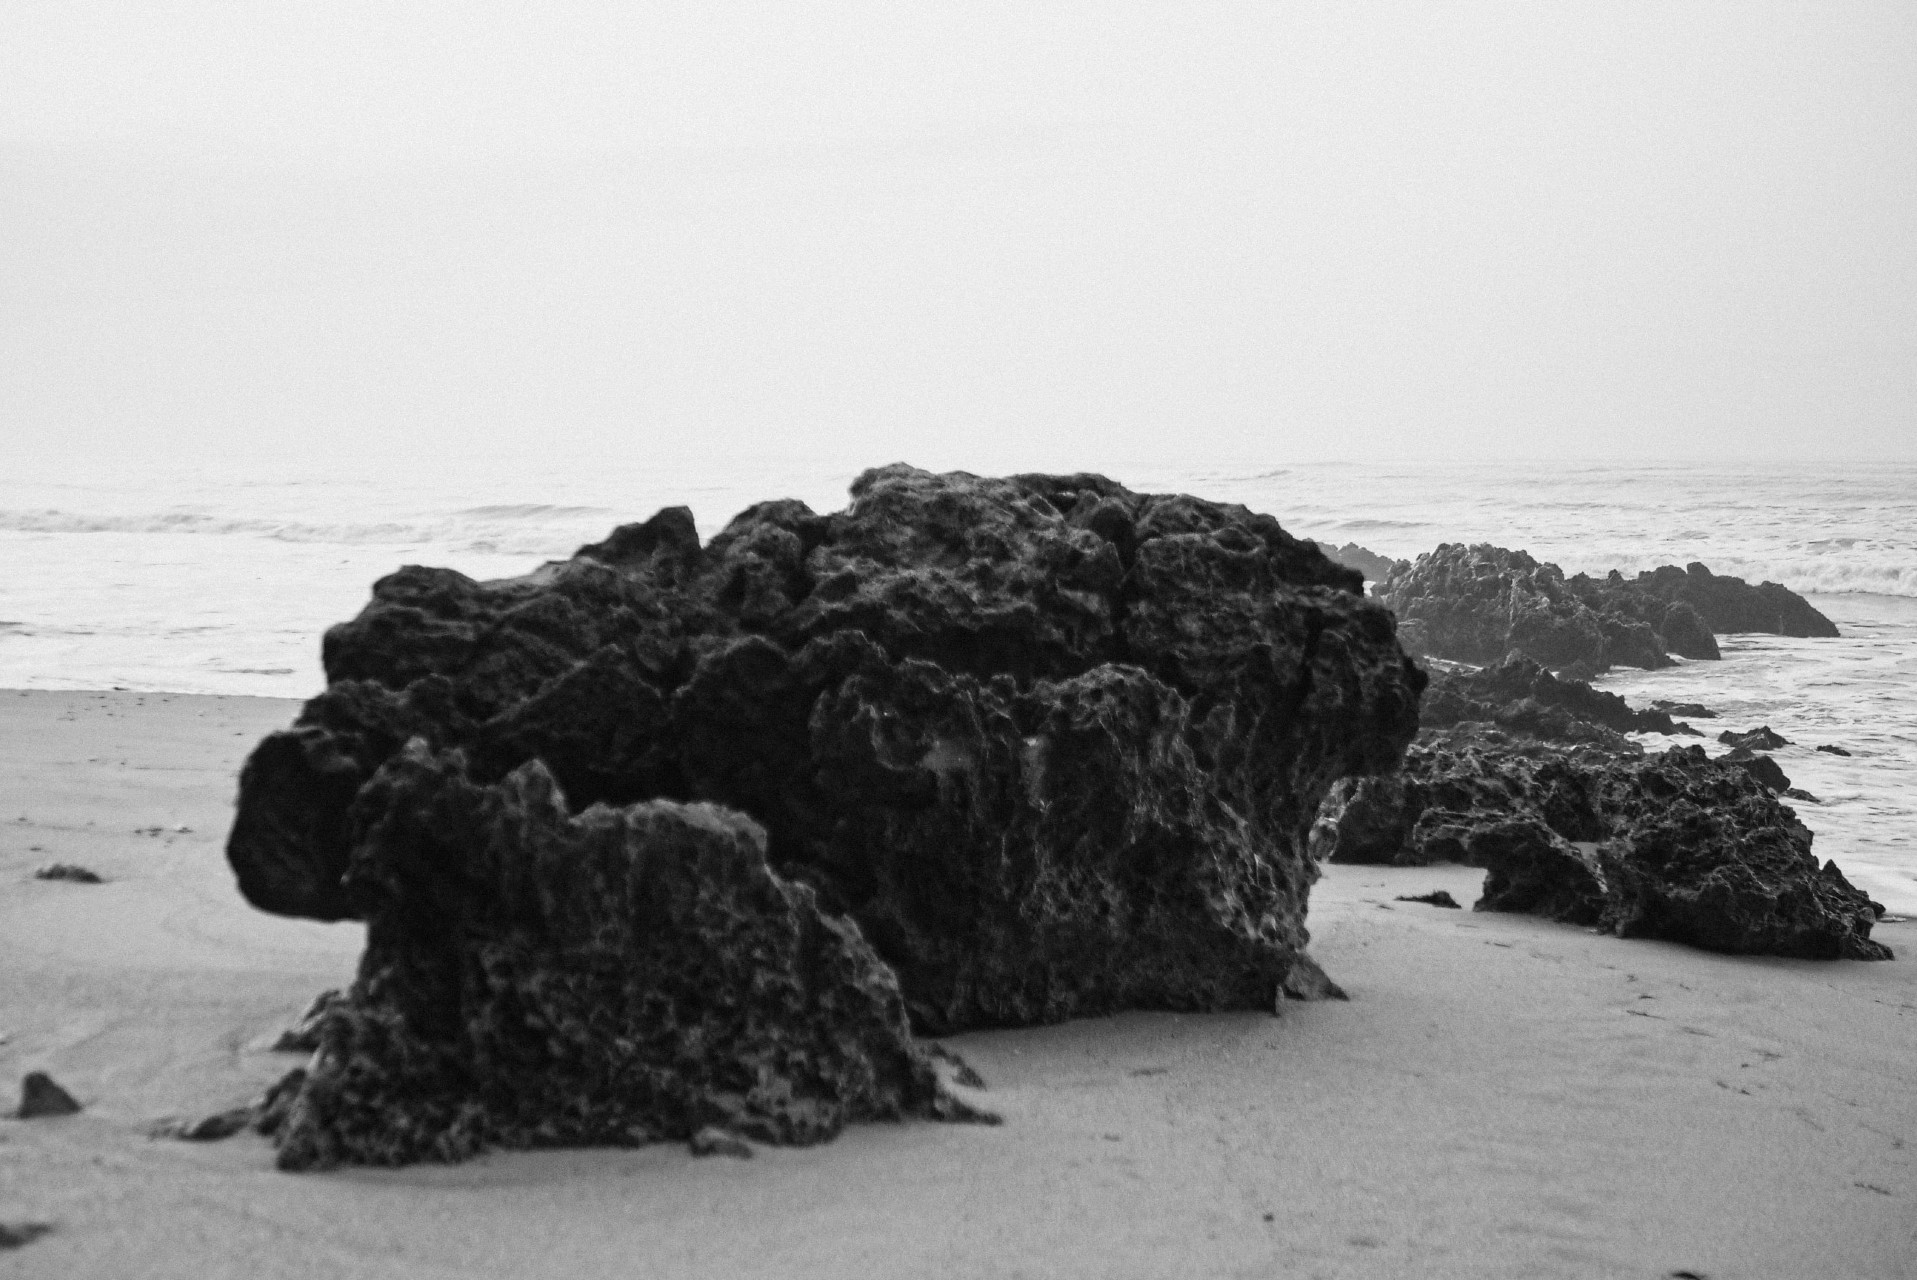 A picture of a rock on Kokrobite beach in Ghana